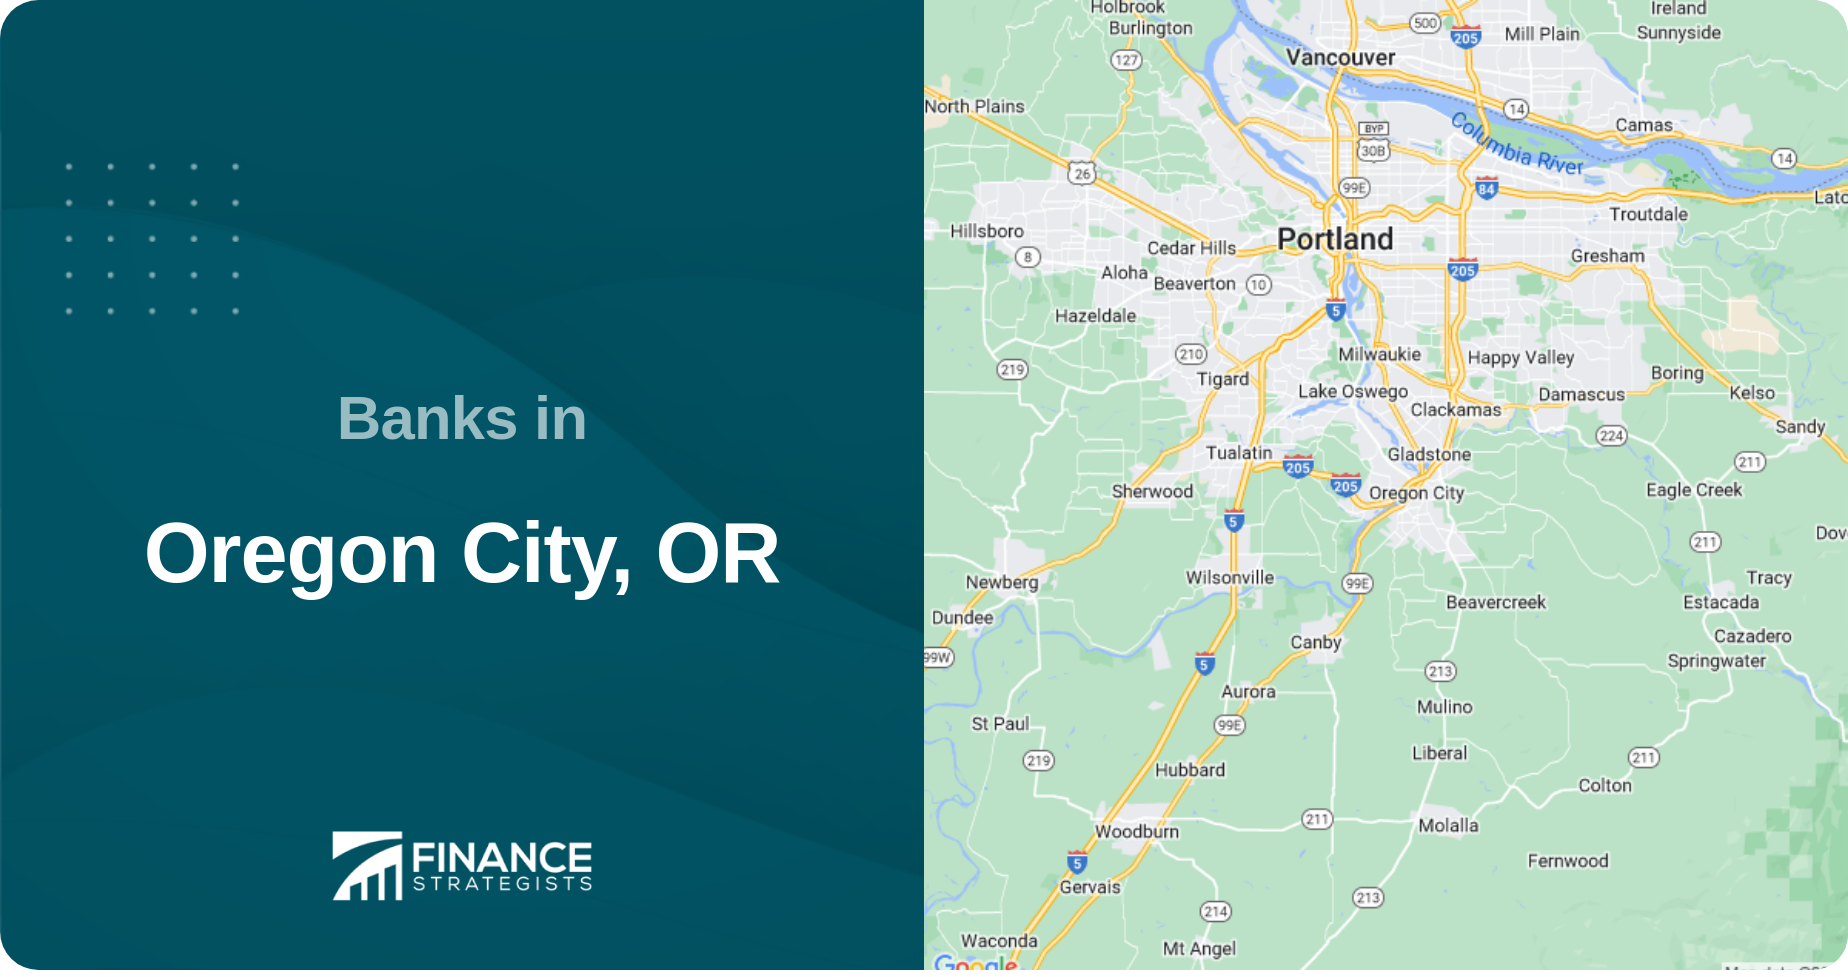 Banks in Oregon City, OR